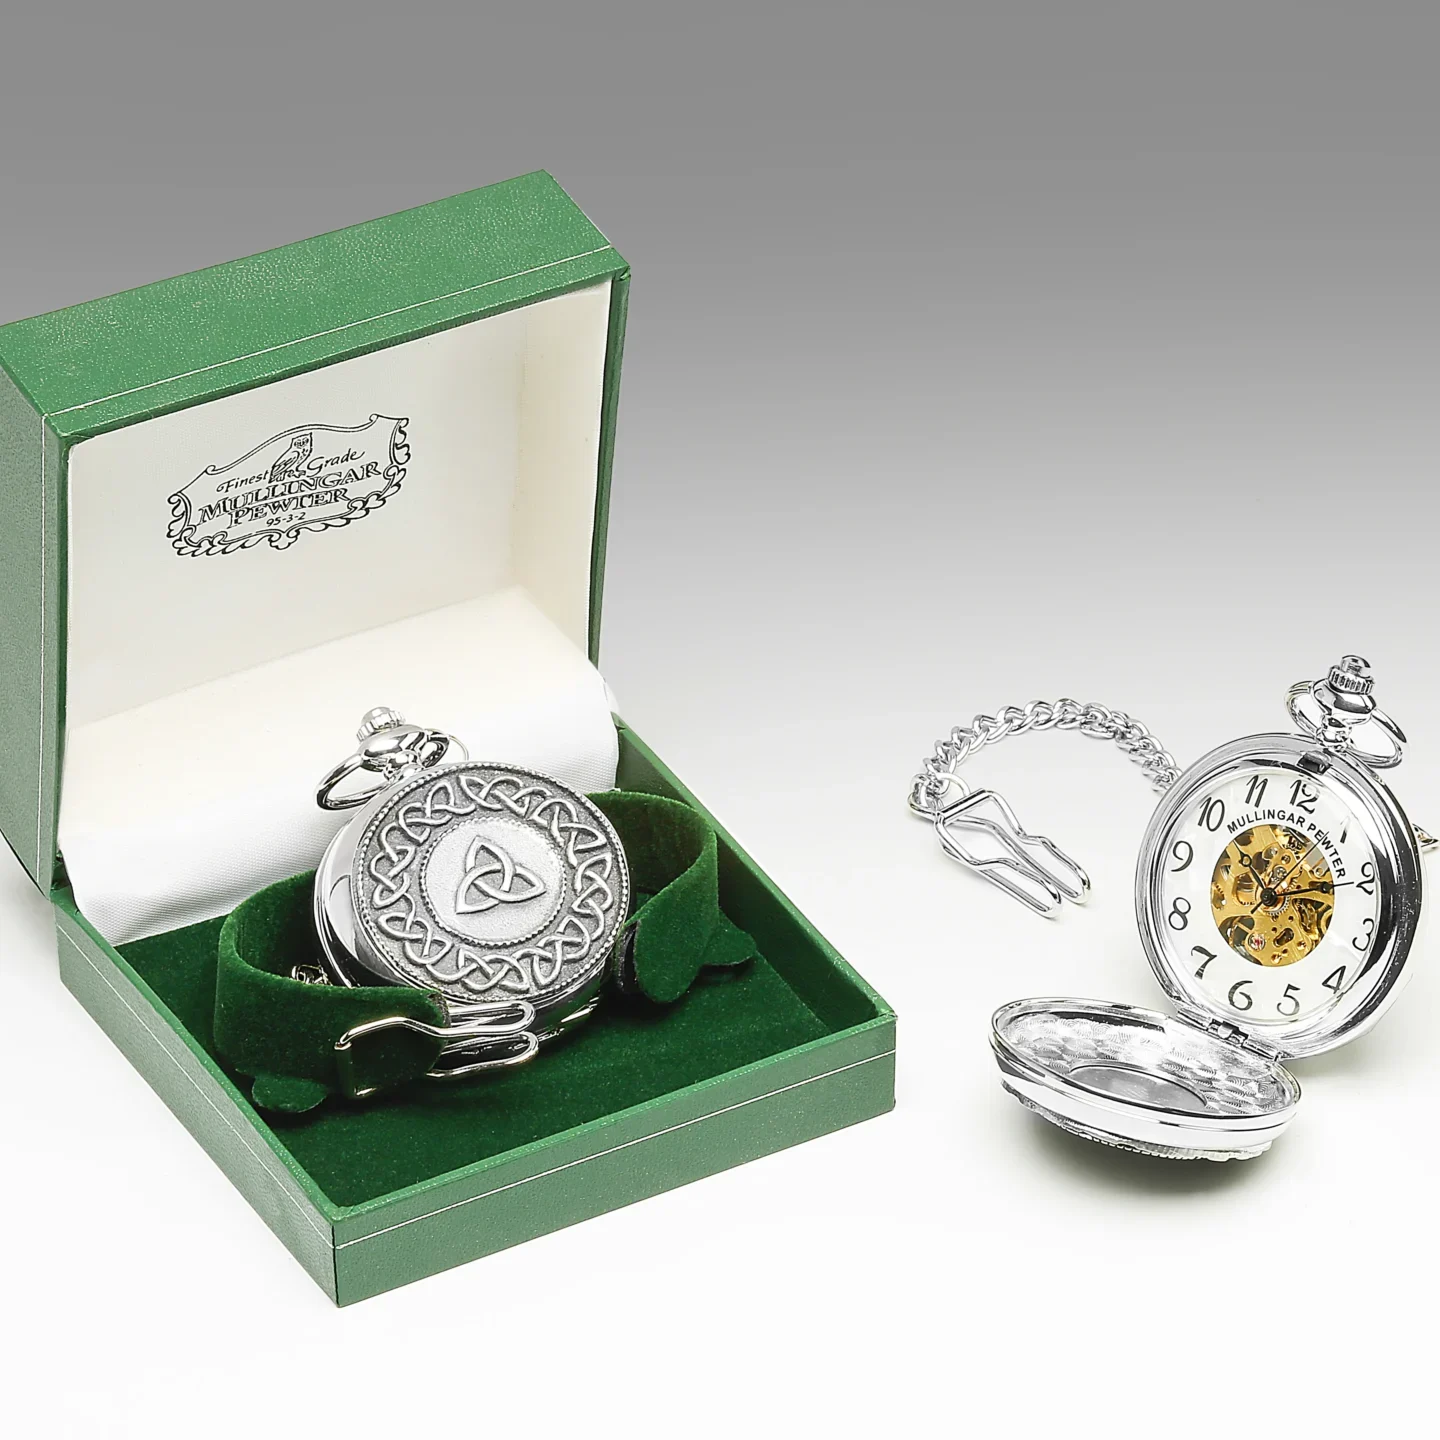 A silver pocket watch sitting in its box next to another one.